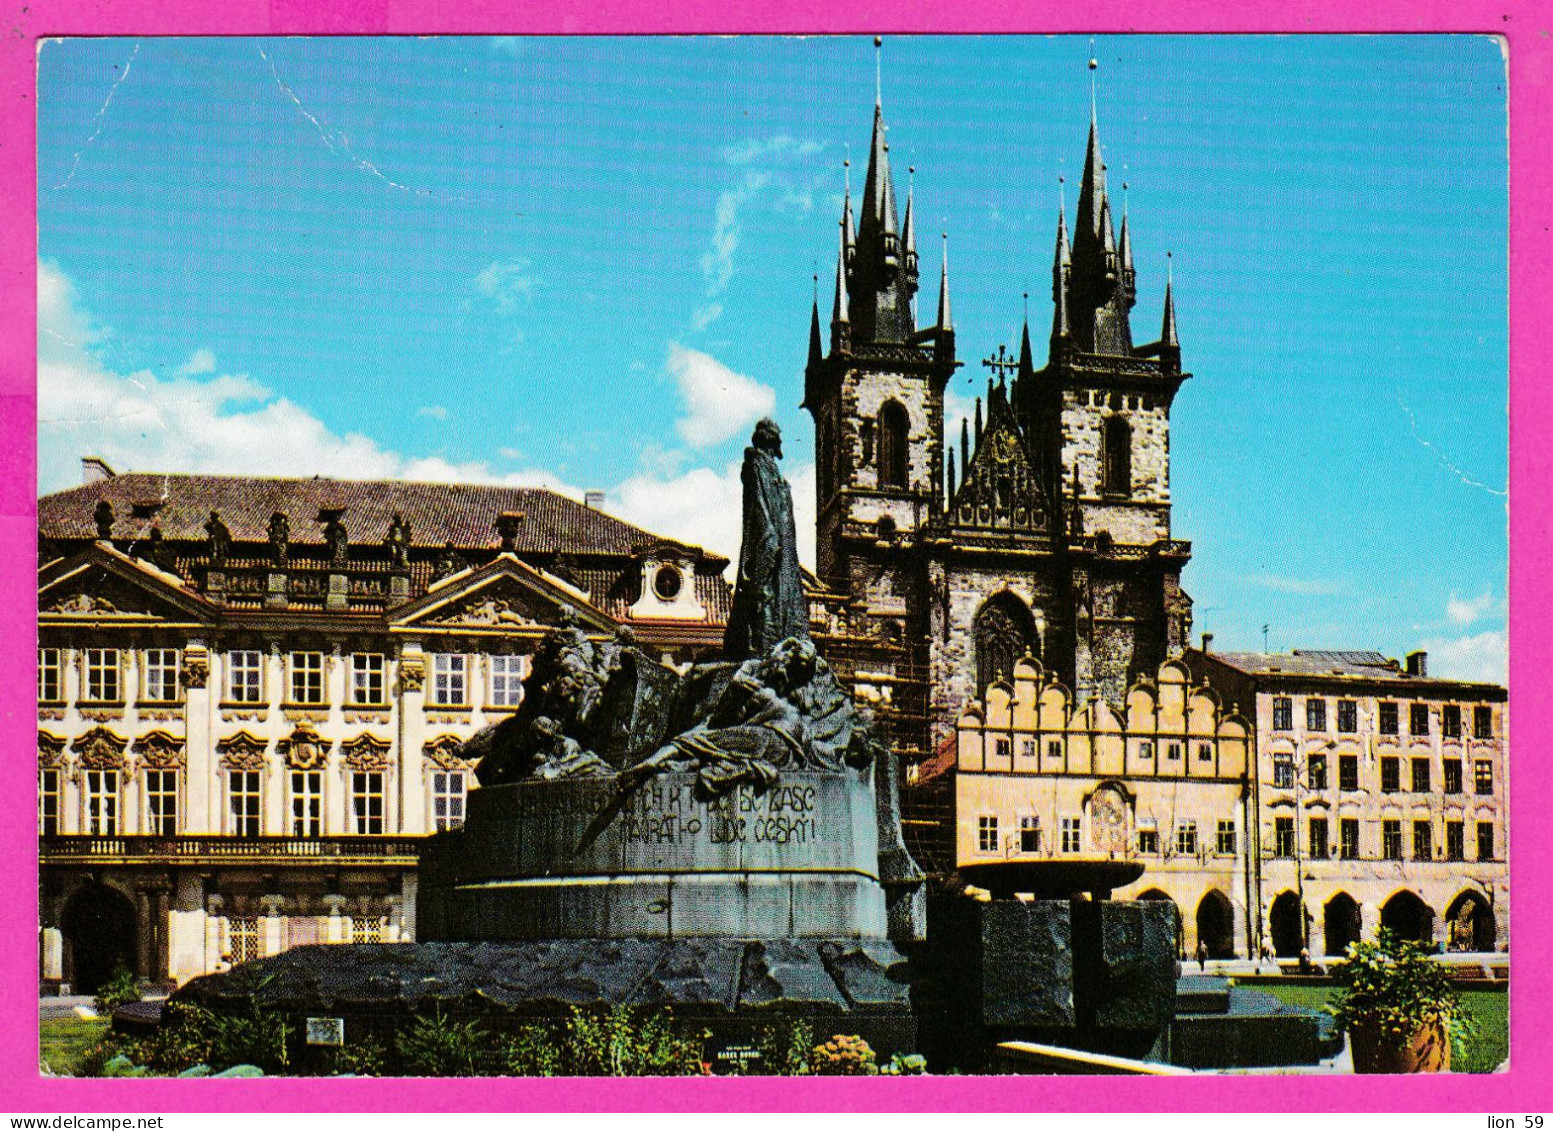 294705 / Czechoslovakia - Praha Church Of Our Lady Before Týn Monument PC 1974 USED 30h Postal Services Letter Bird - Briefe U. Dokumente